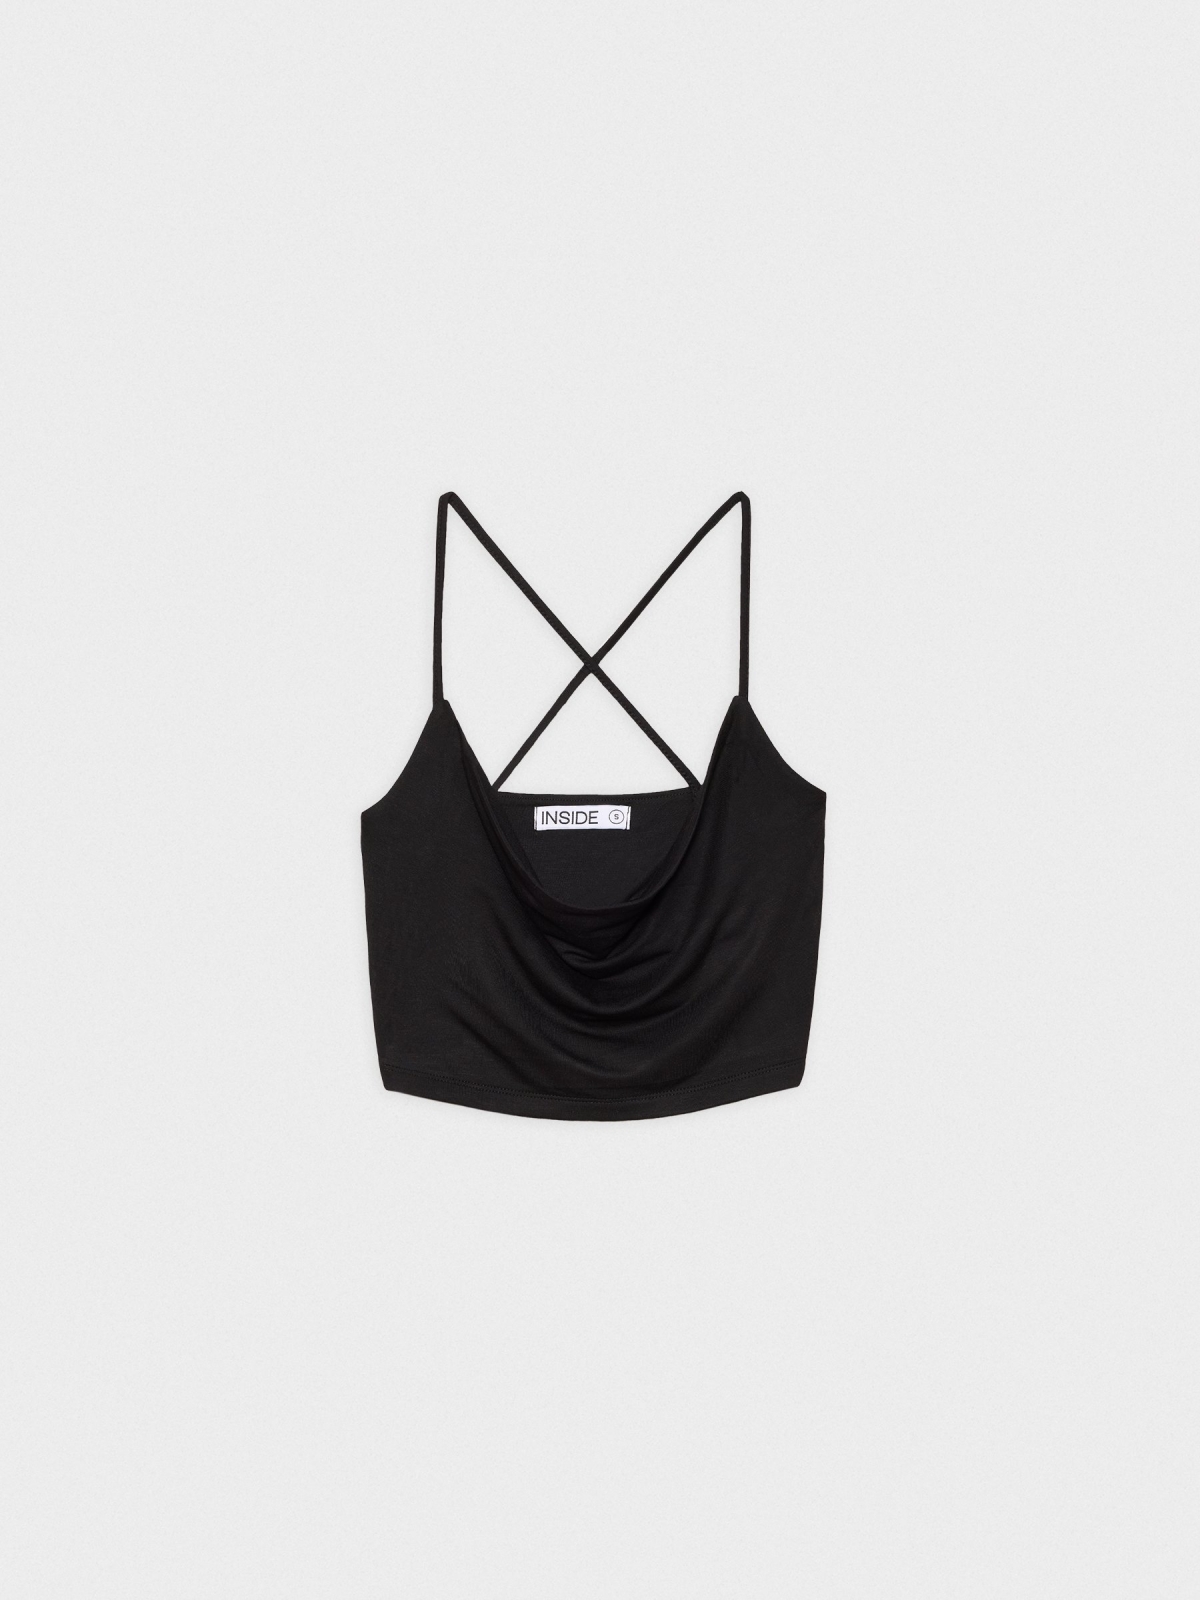  Crop top with crossed straps black